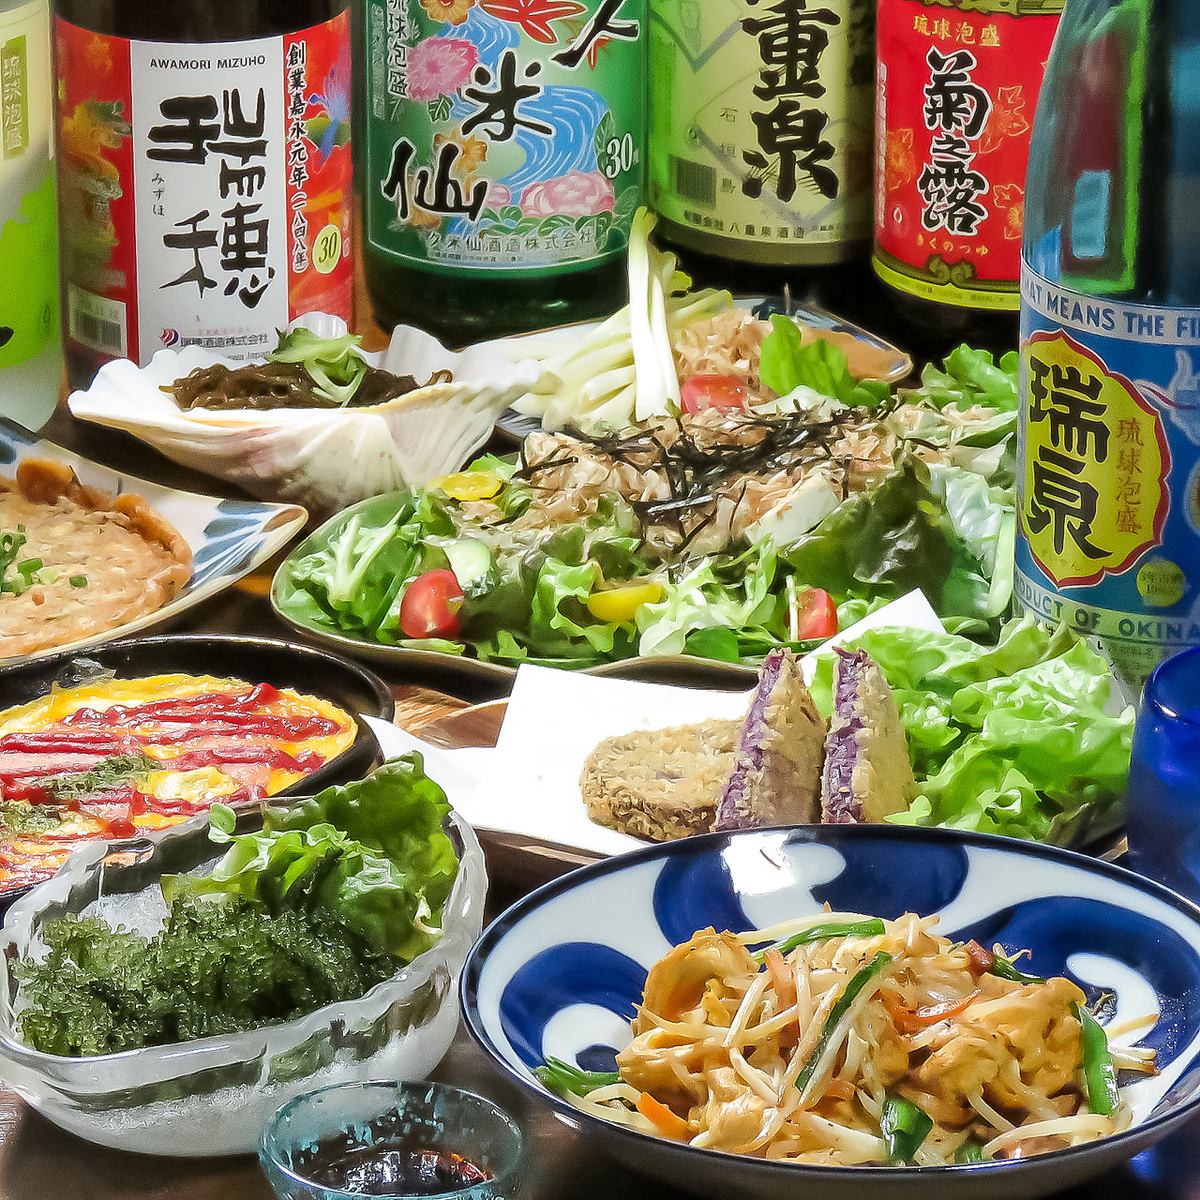 Course meals are available starting from 3,000 yen! See the course section for details!